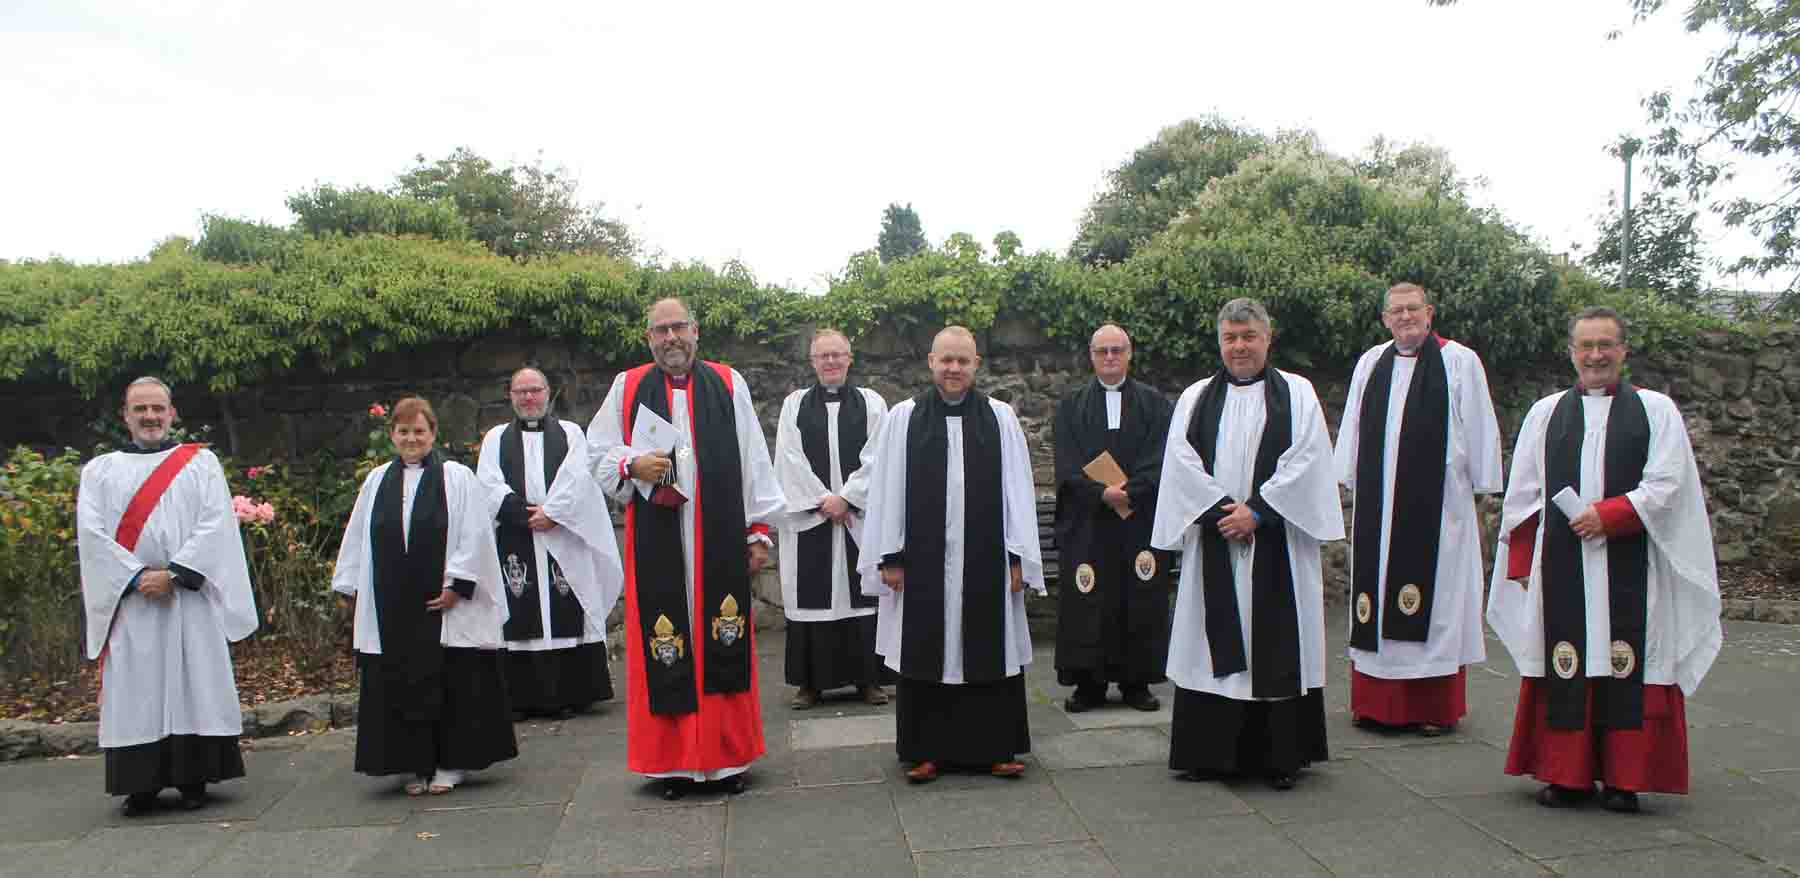 At the Service of Ordination of Priests on September 12 are, from left: The Rev Brendan O'Loan; the Rev Janet Spence; the Rev Canon Kevin Graham, Director of Ordinands; Bishop George Davison; Archdeacon Barry Forde; the Rev Nathan Ervine; the Rev William Taggart, Registrar; the Rev Christopher St John, rector, St Nicholas'; the Rev Canon James Carson, preacher; Archdeacon Paul Dundas.